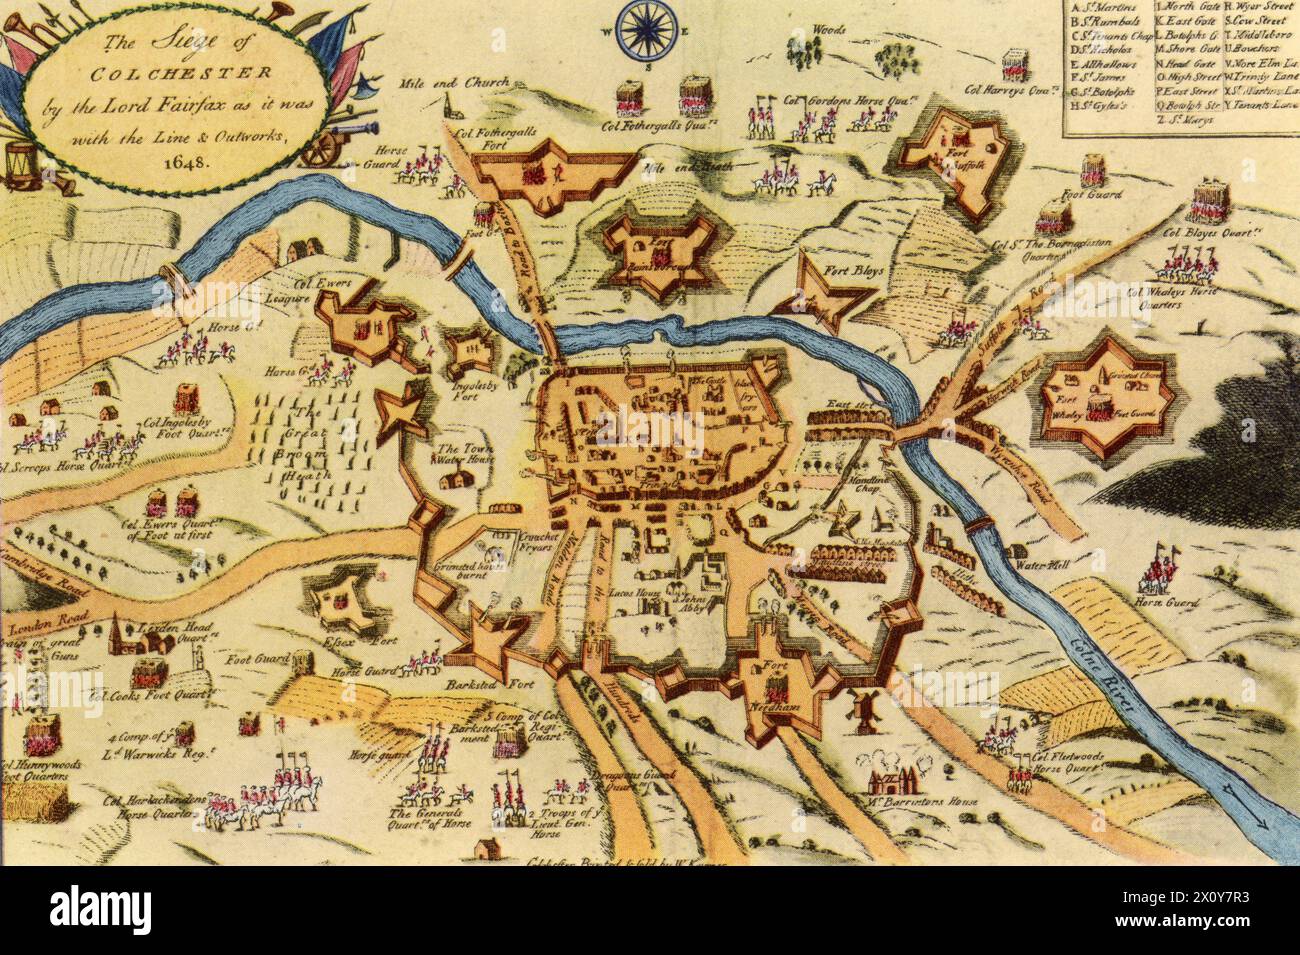 'The Siege of Colchester by the Lord Fairfax as it was with the Line & Outworks', 1648. By W. Keymer. The Siege of Colchester occurred in the 1648, during the Second English Civil War. Colchester found itself under siege when the Royalist army was attacked by the Parliamentary force of Thomas Fairfax (1612-1671). The Parliamentarians' initial attack forced the Royalist army to retreat behind the town's walls. Despite the privations of the siege, the Royalists resisted for eleven weeks and only surrendered following the defeat of the Royalist army at the Battle of Preston. Stock Photo